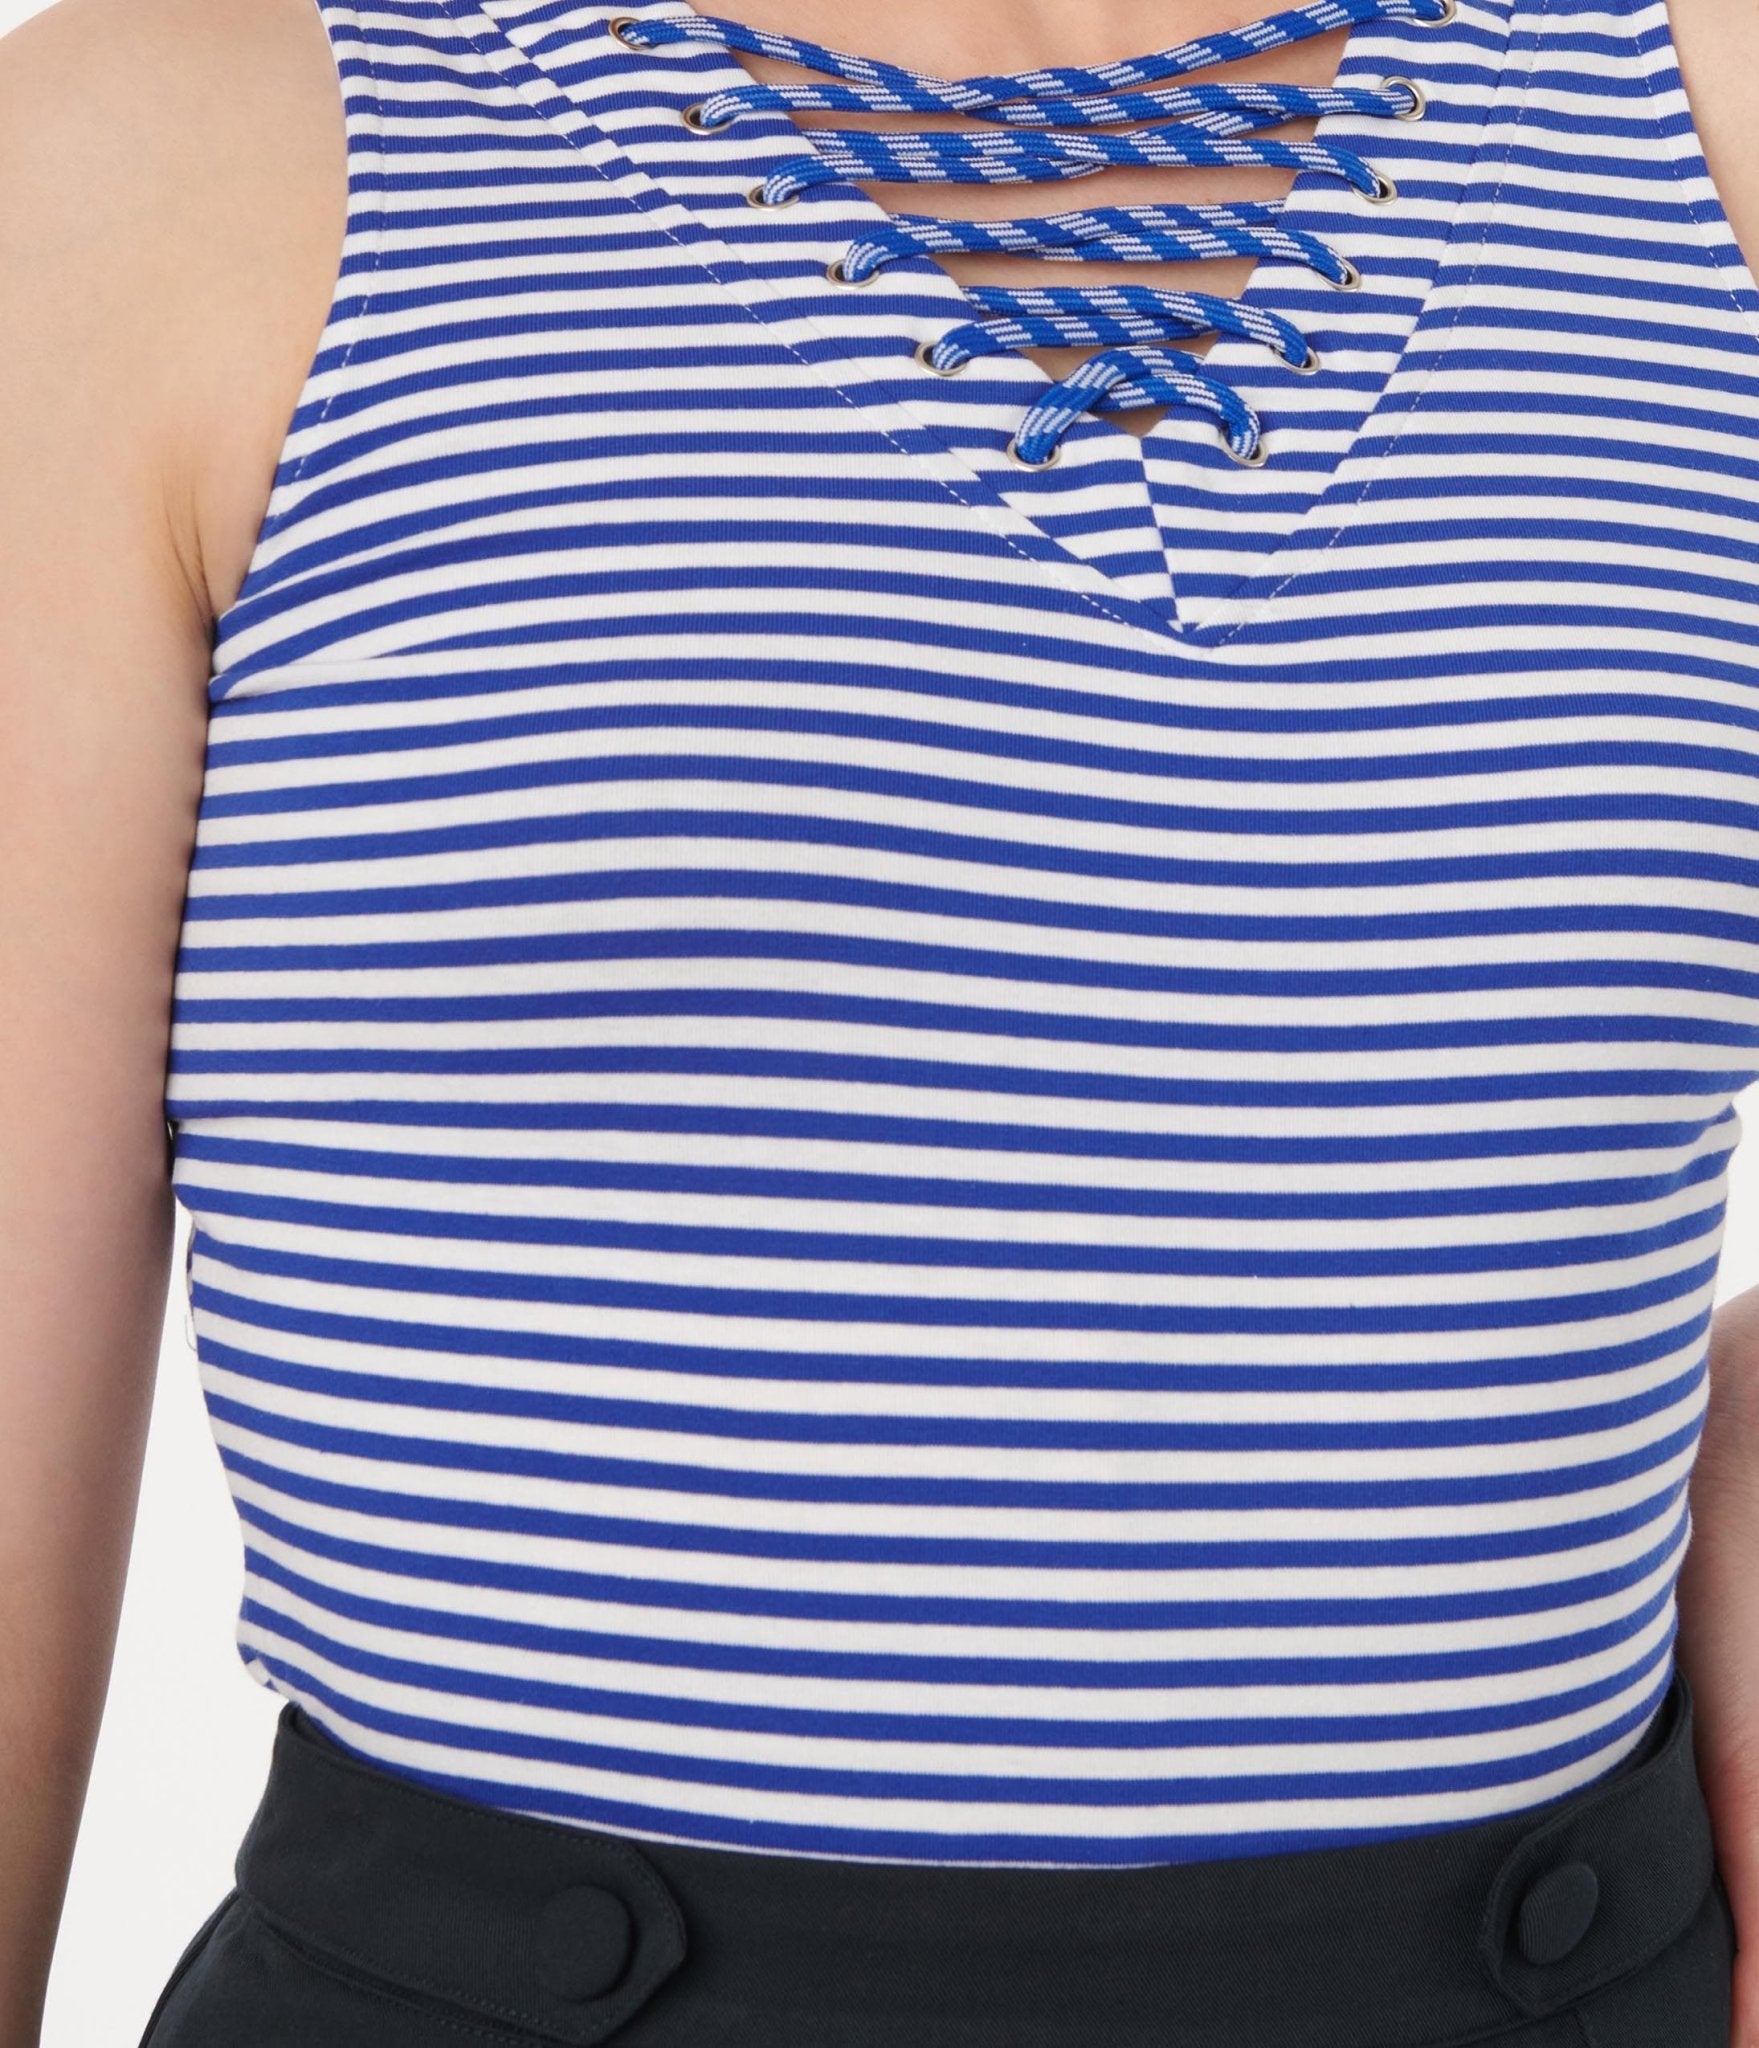 navy striped lace top